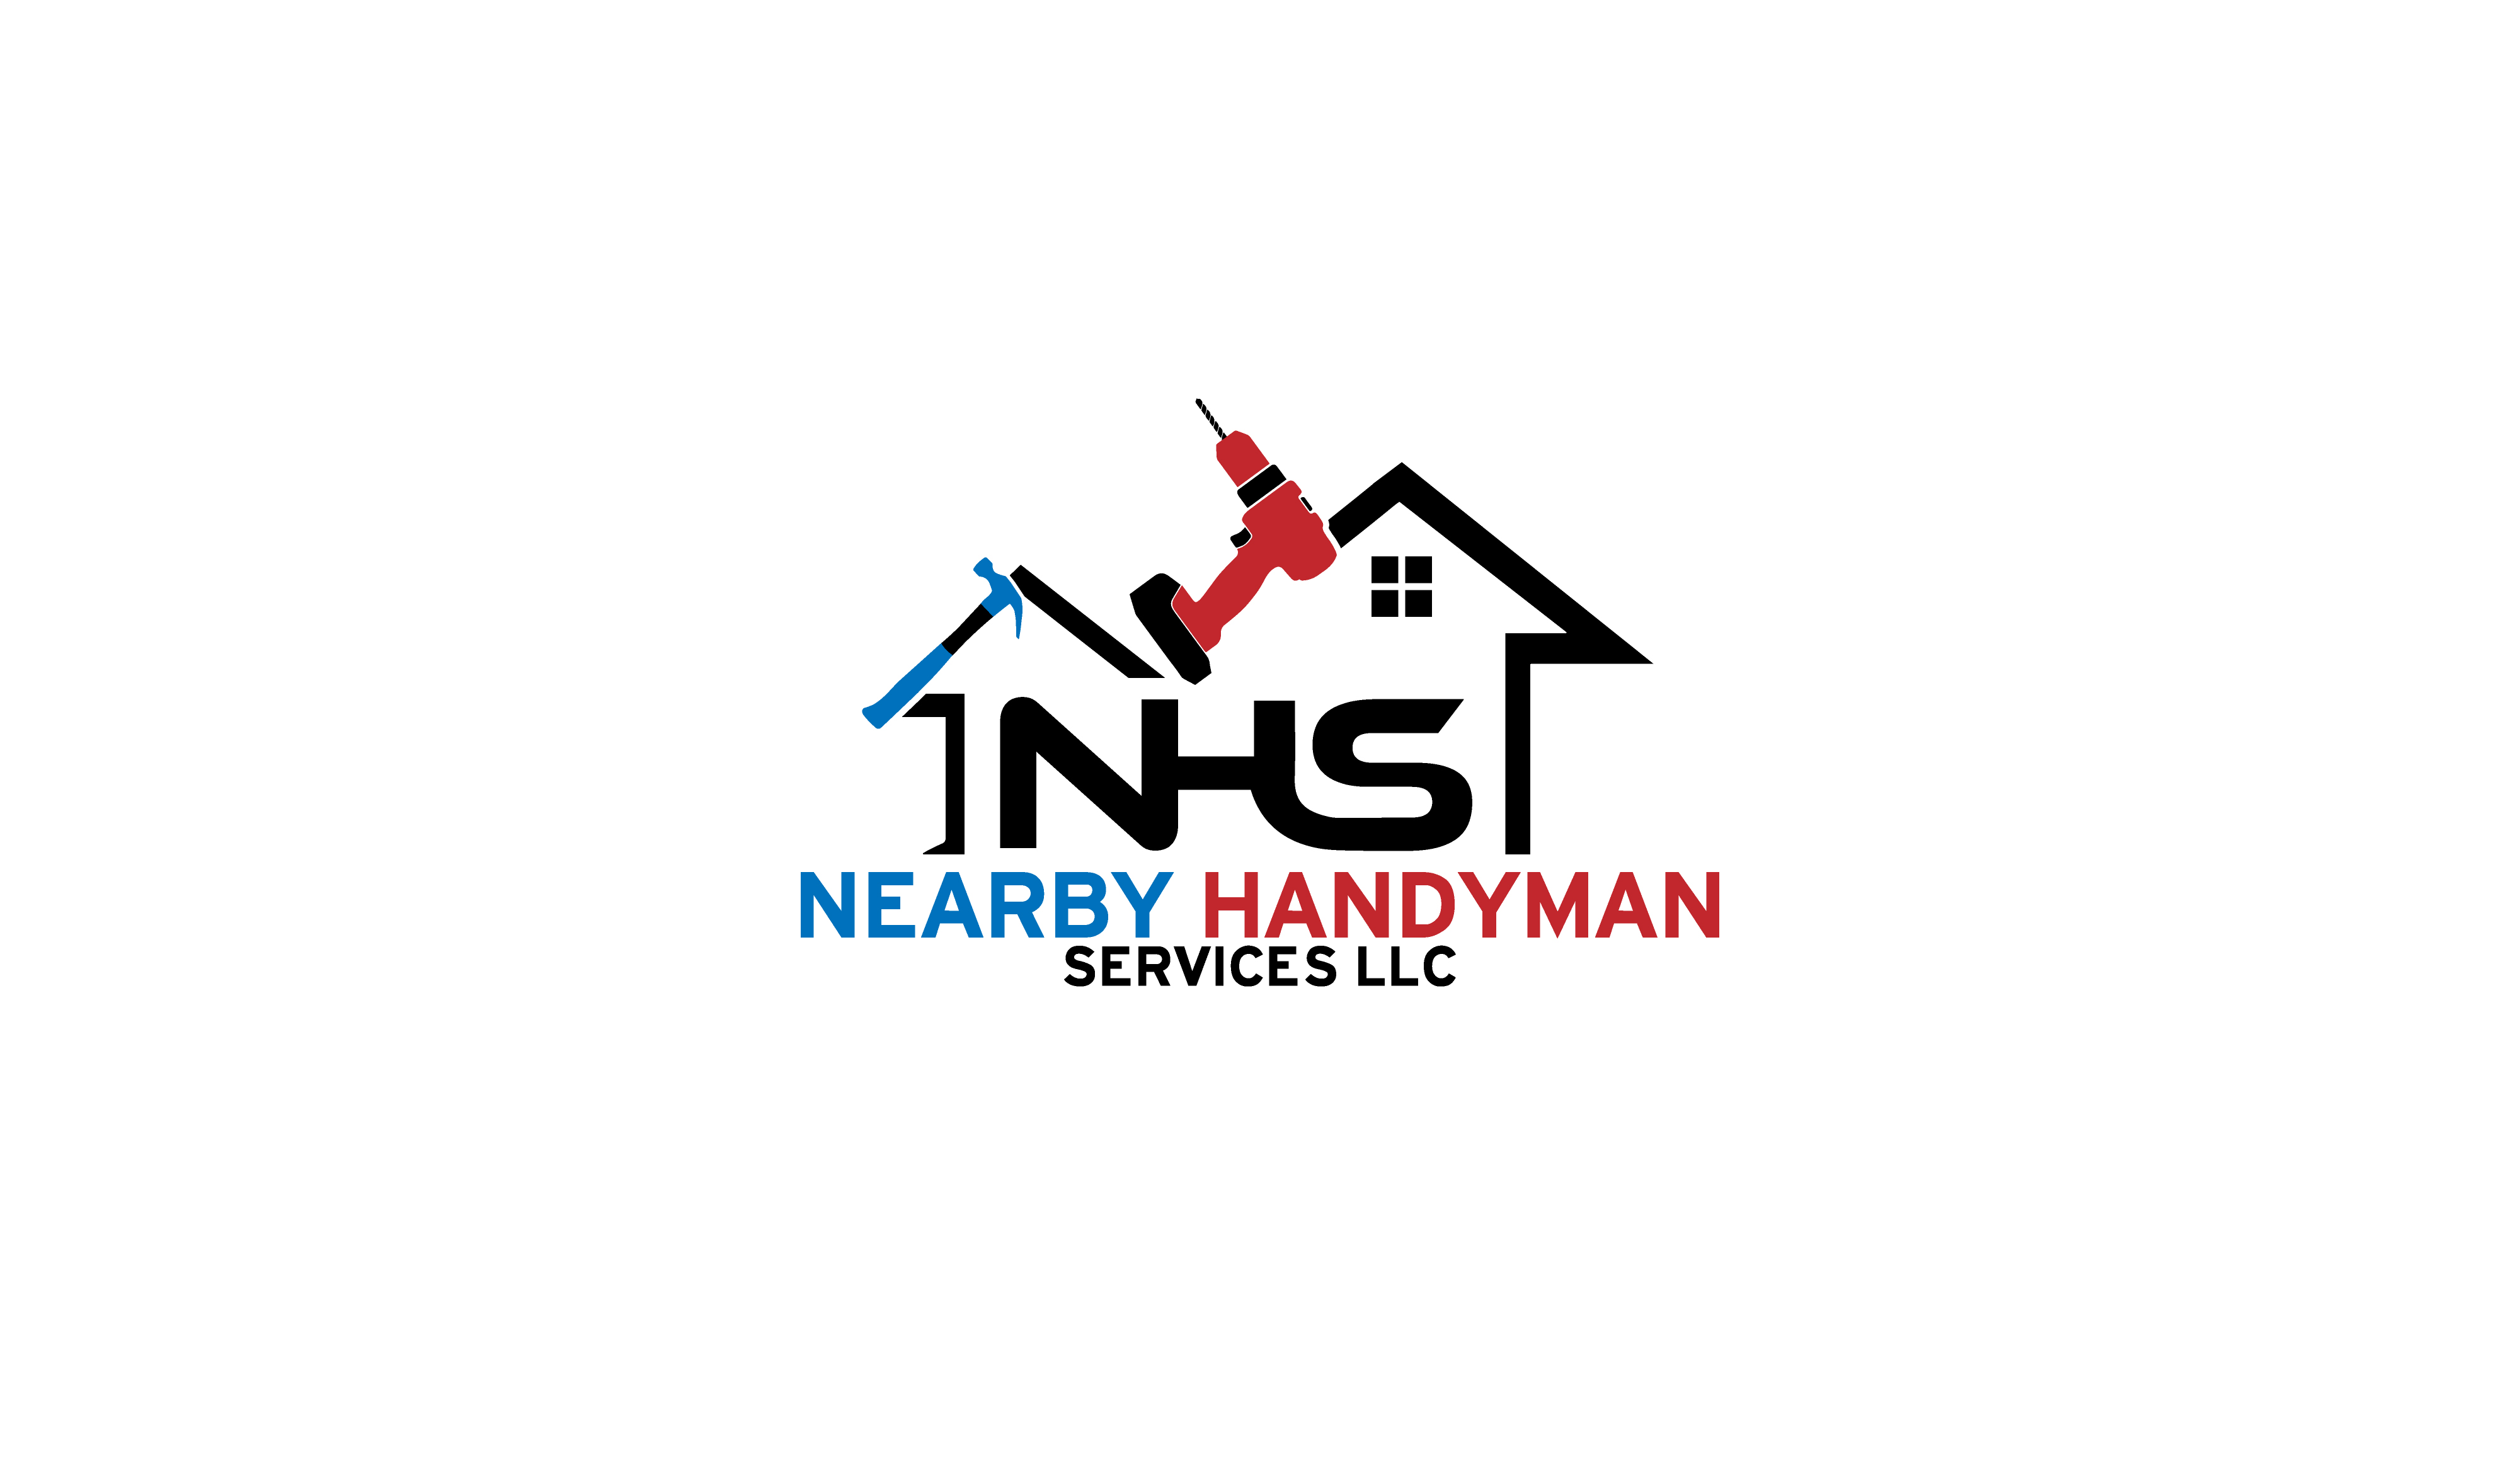 Nearby Handyman Services, LLC-Unlicensed Contractor Logo